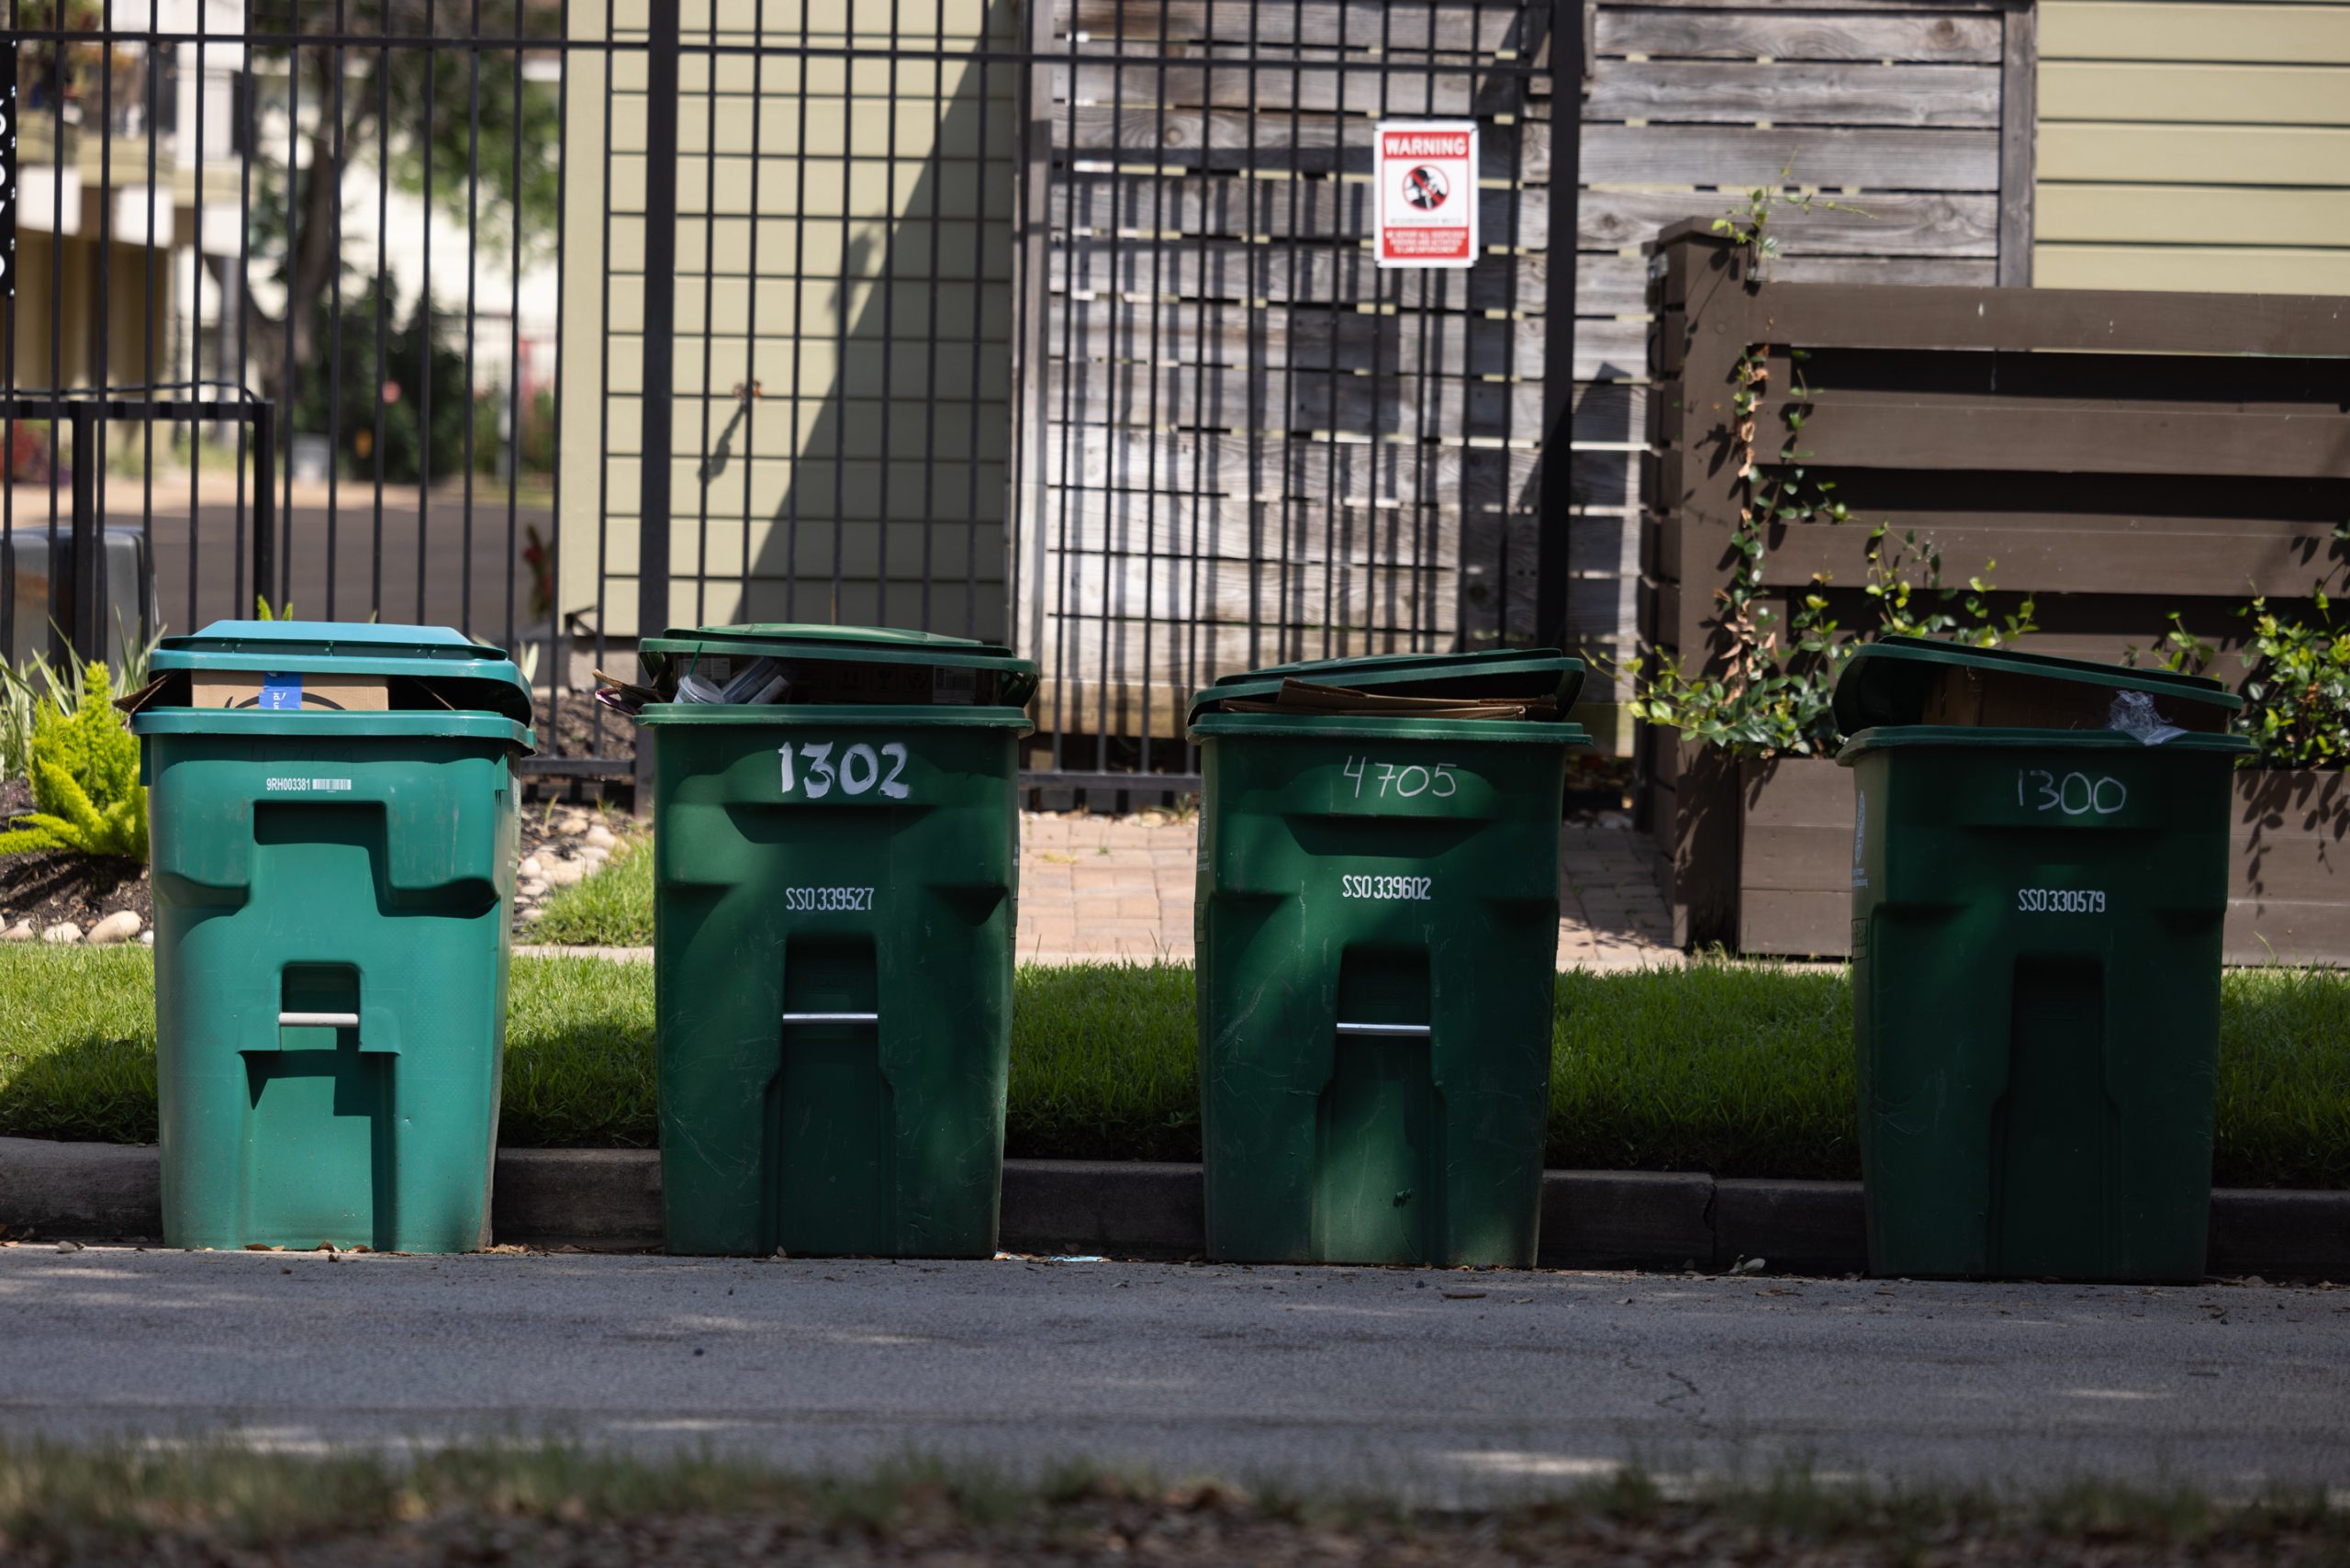 Uncollected city of Houston recycling bins